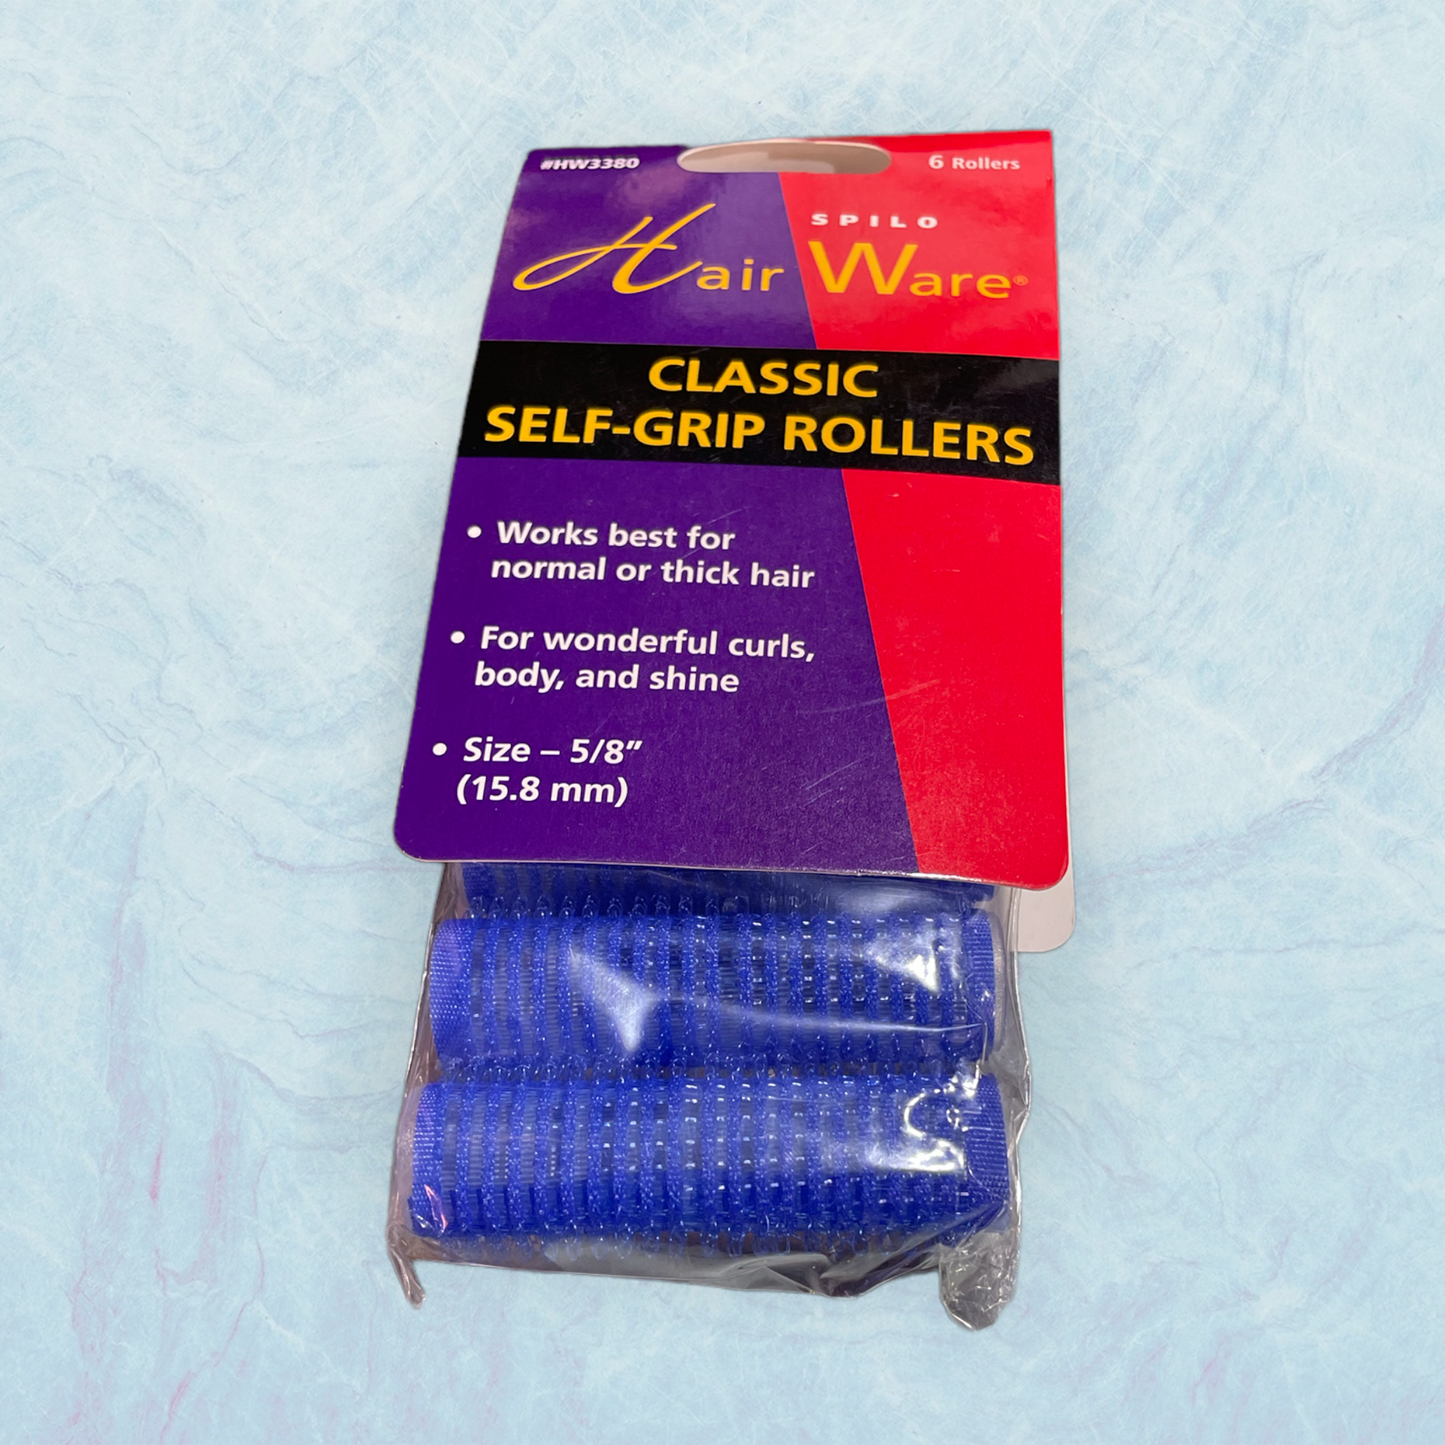 Hair Ware Classic Self-grip Rollers